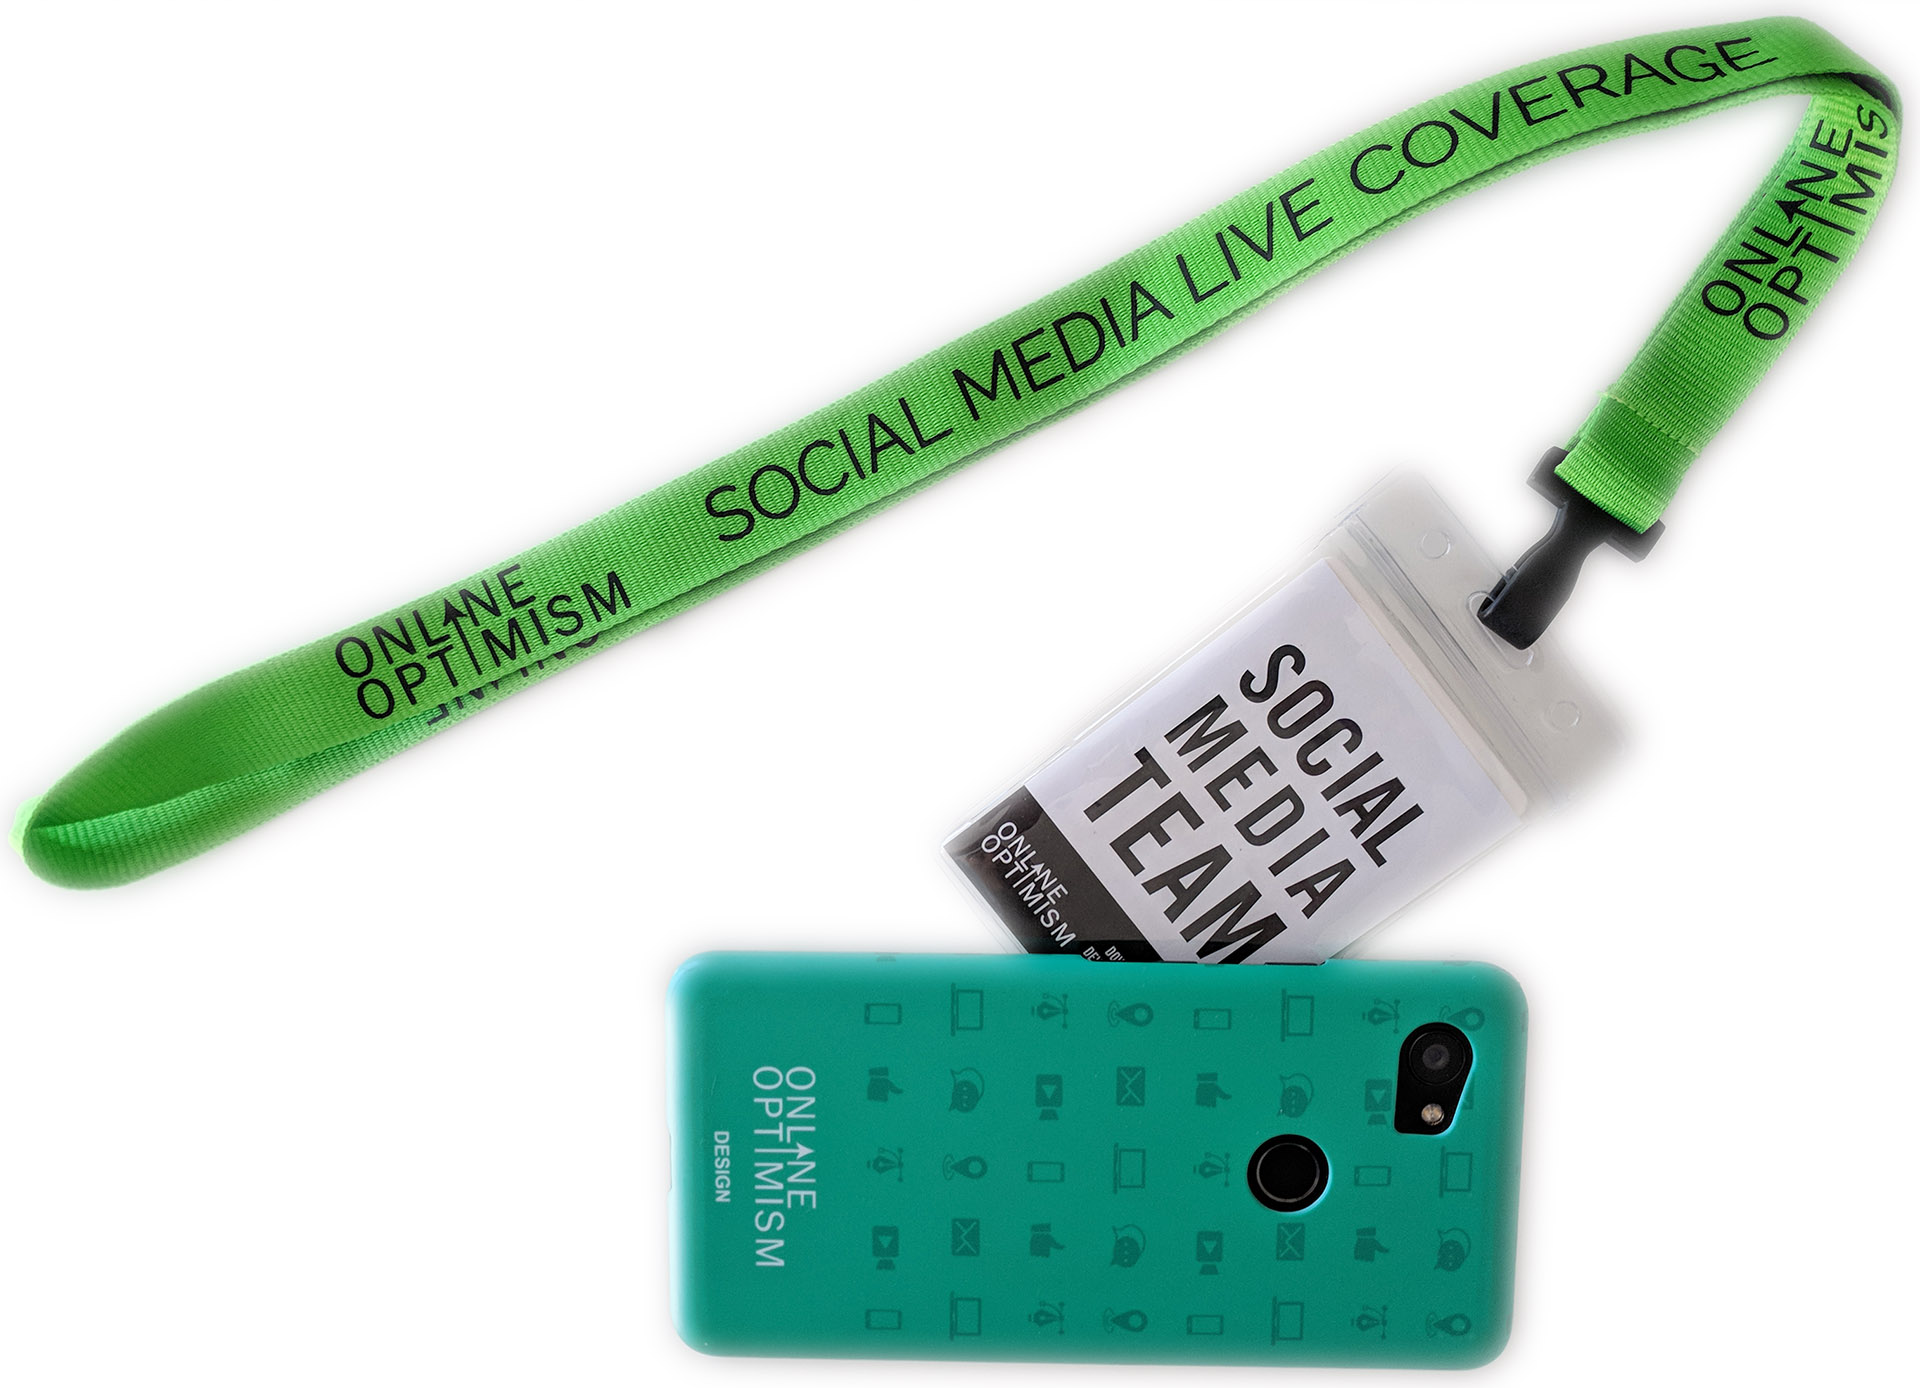 Social Media Event Marketing Live Coverage by Online Optimism - Green Phone and Branded Green Lanyard - shrunk